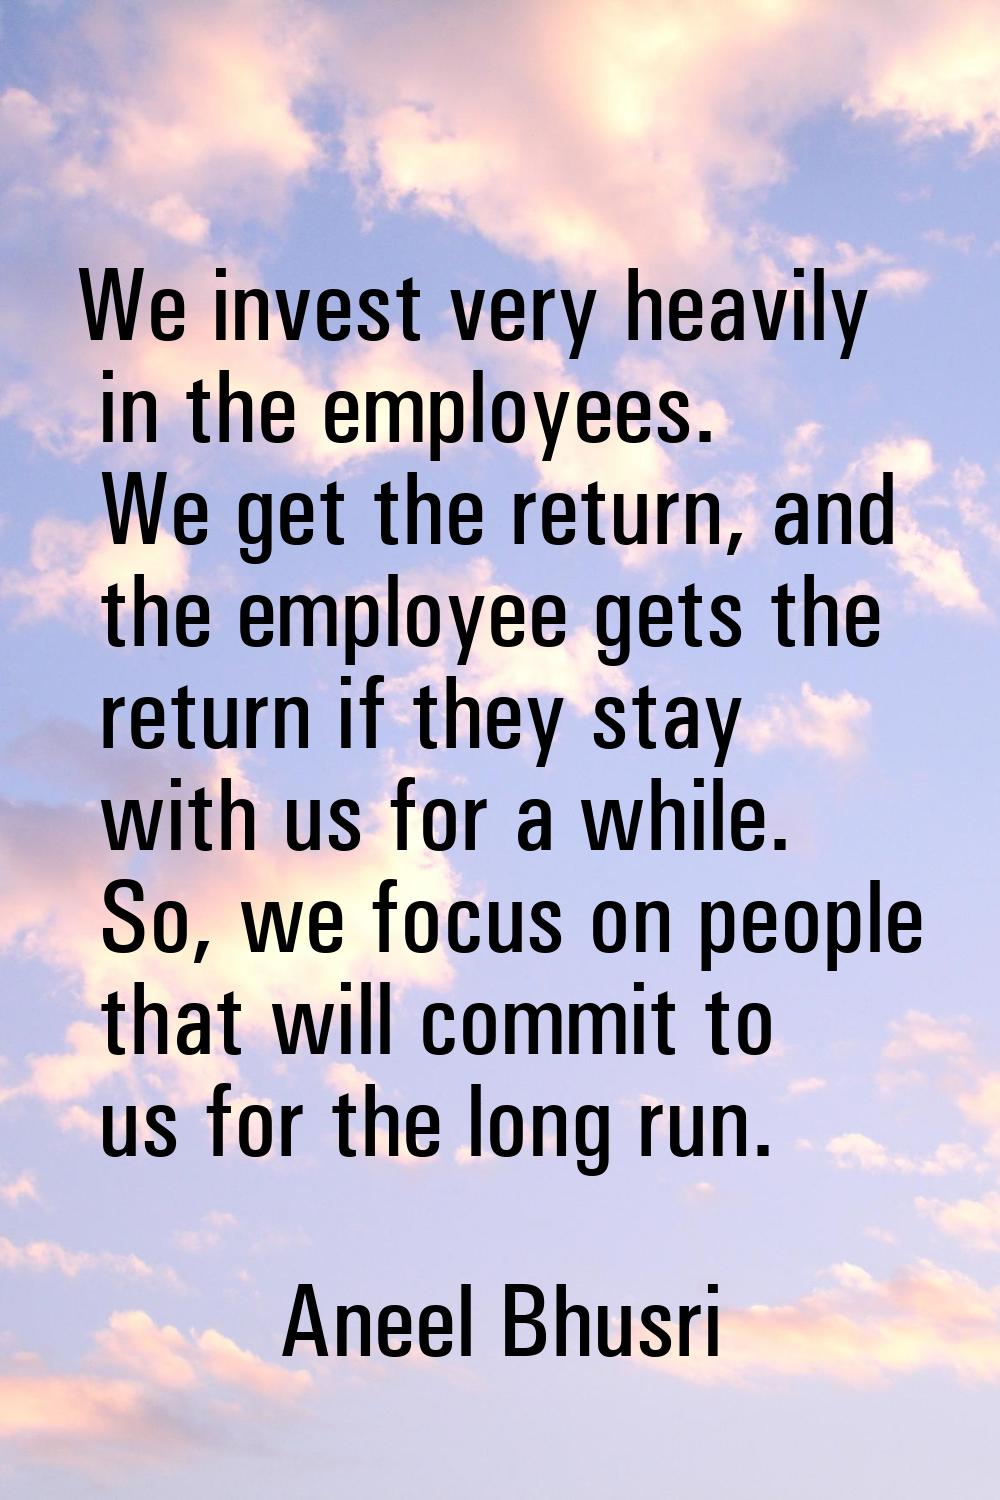 We invest very heavily in the employees. We get the return, and the employee gets the return if the